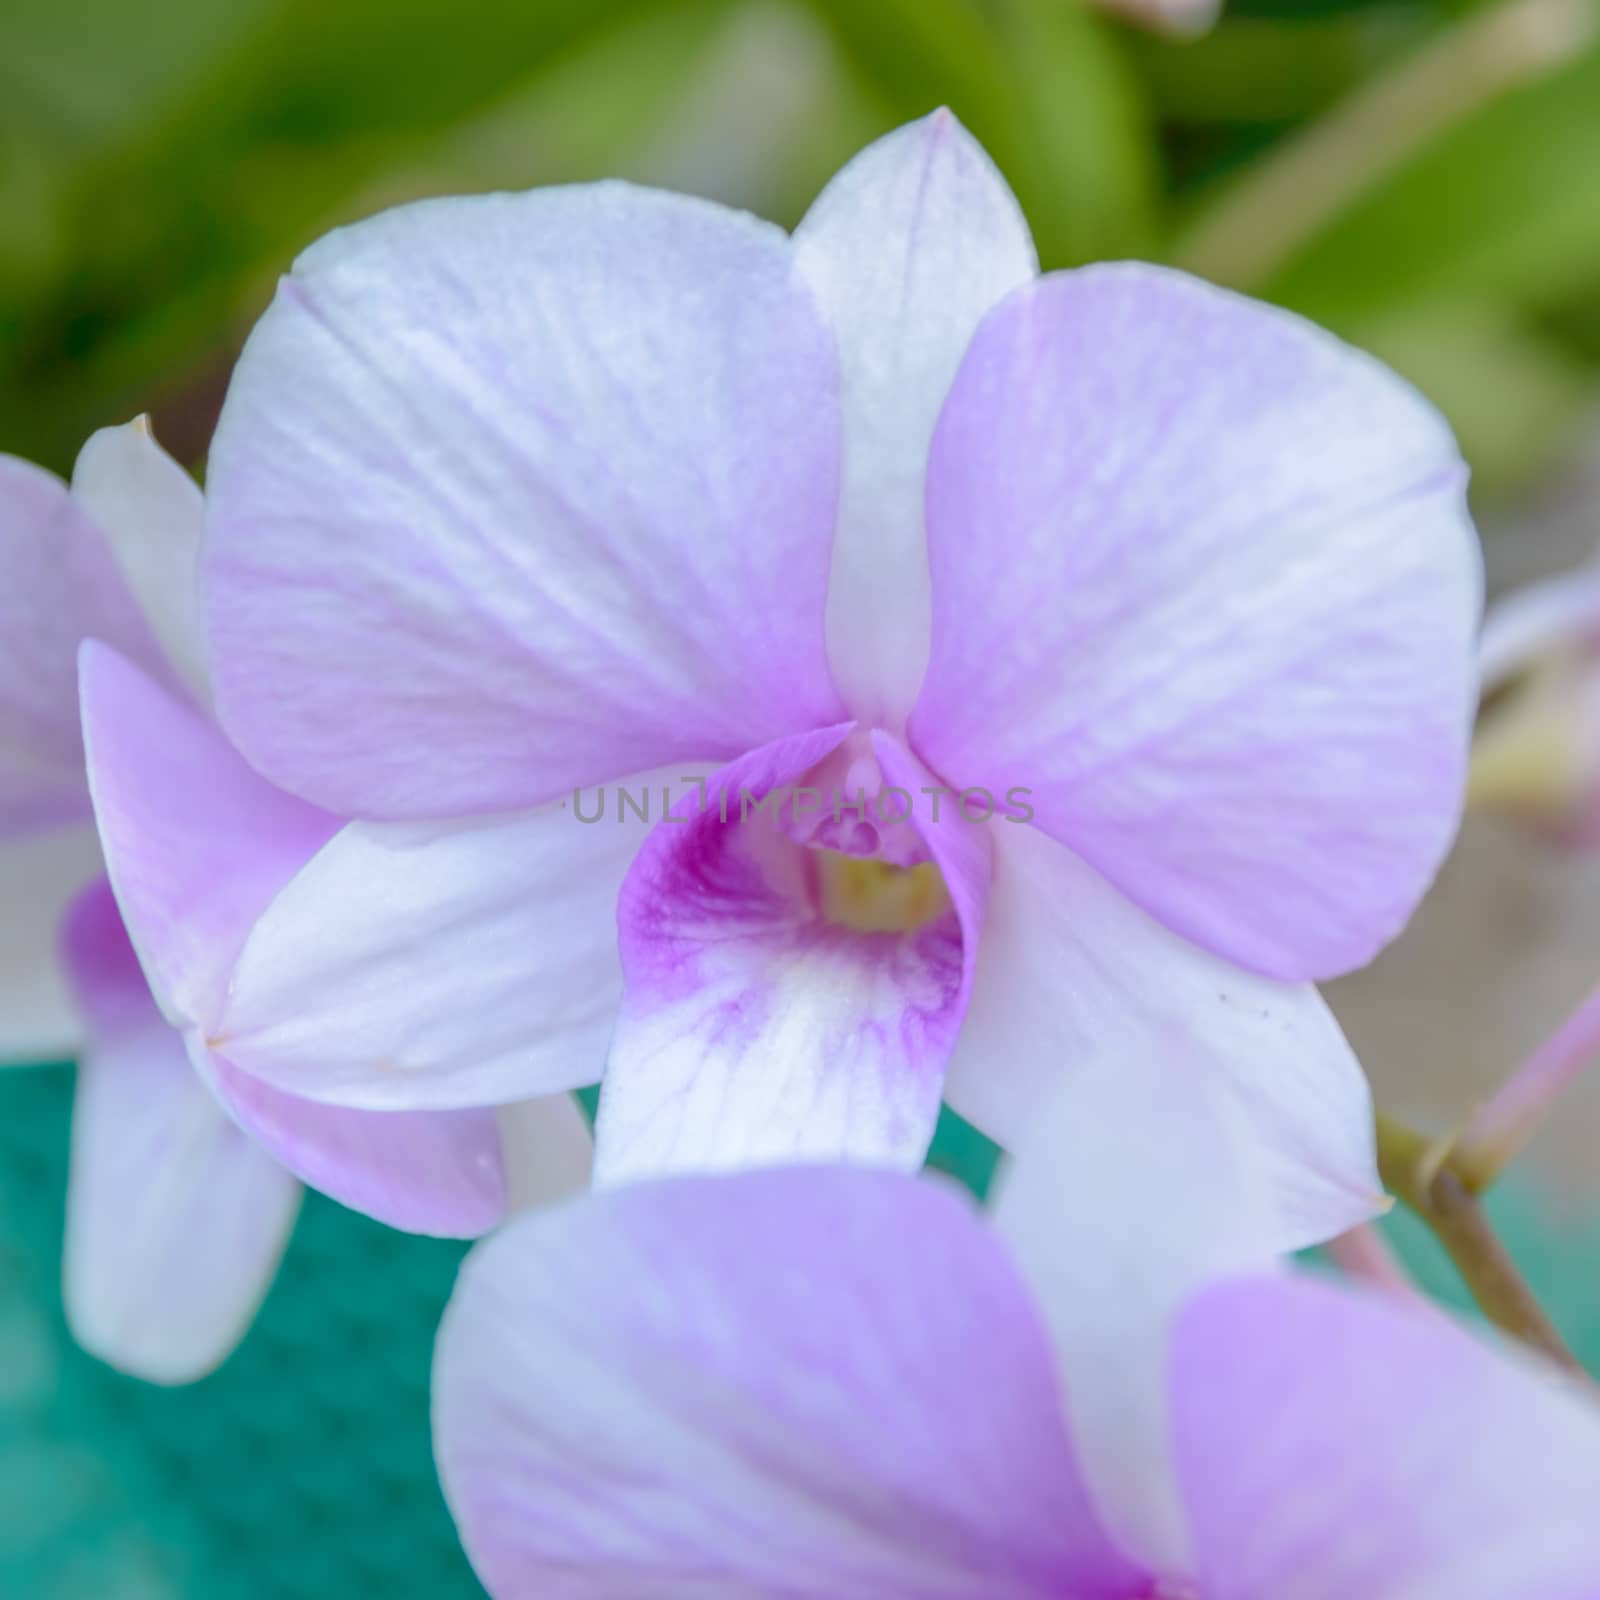 Violet orchid flowers closeup.Orchid flower bloom for background